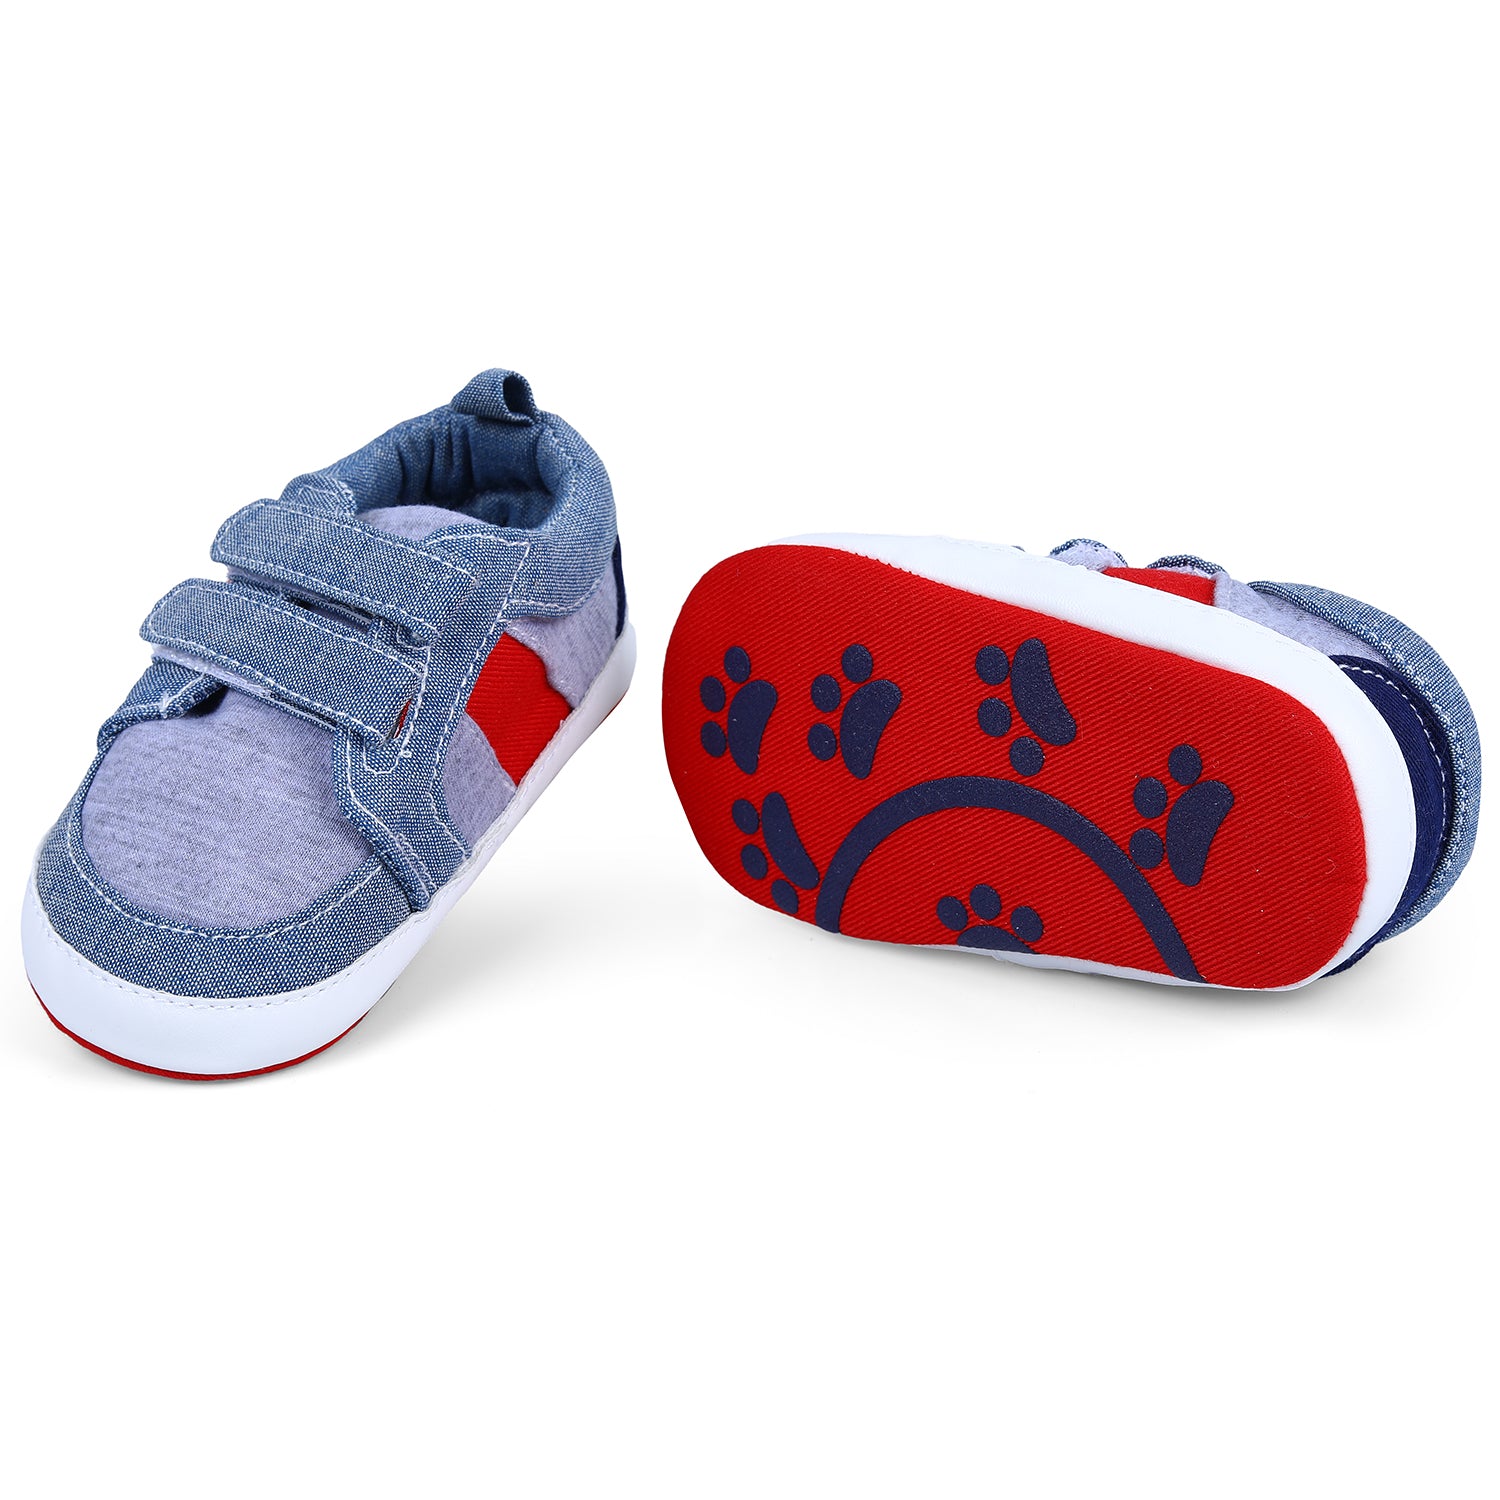 Colour Blocked Cute And Casual Denim Velcro Booties - Blue And Red - Baby Moo